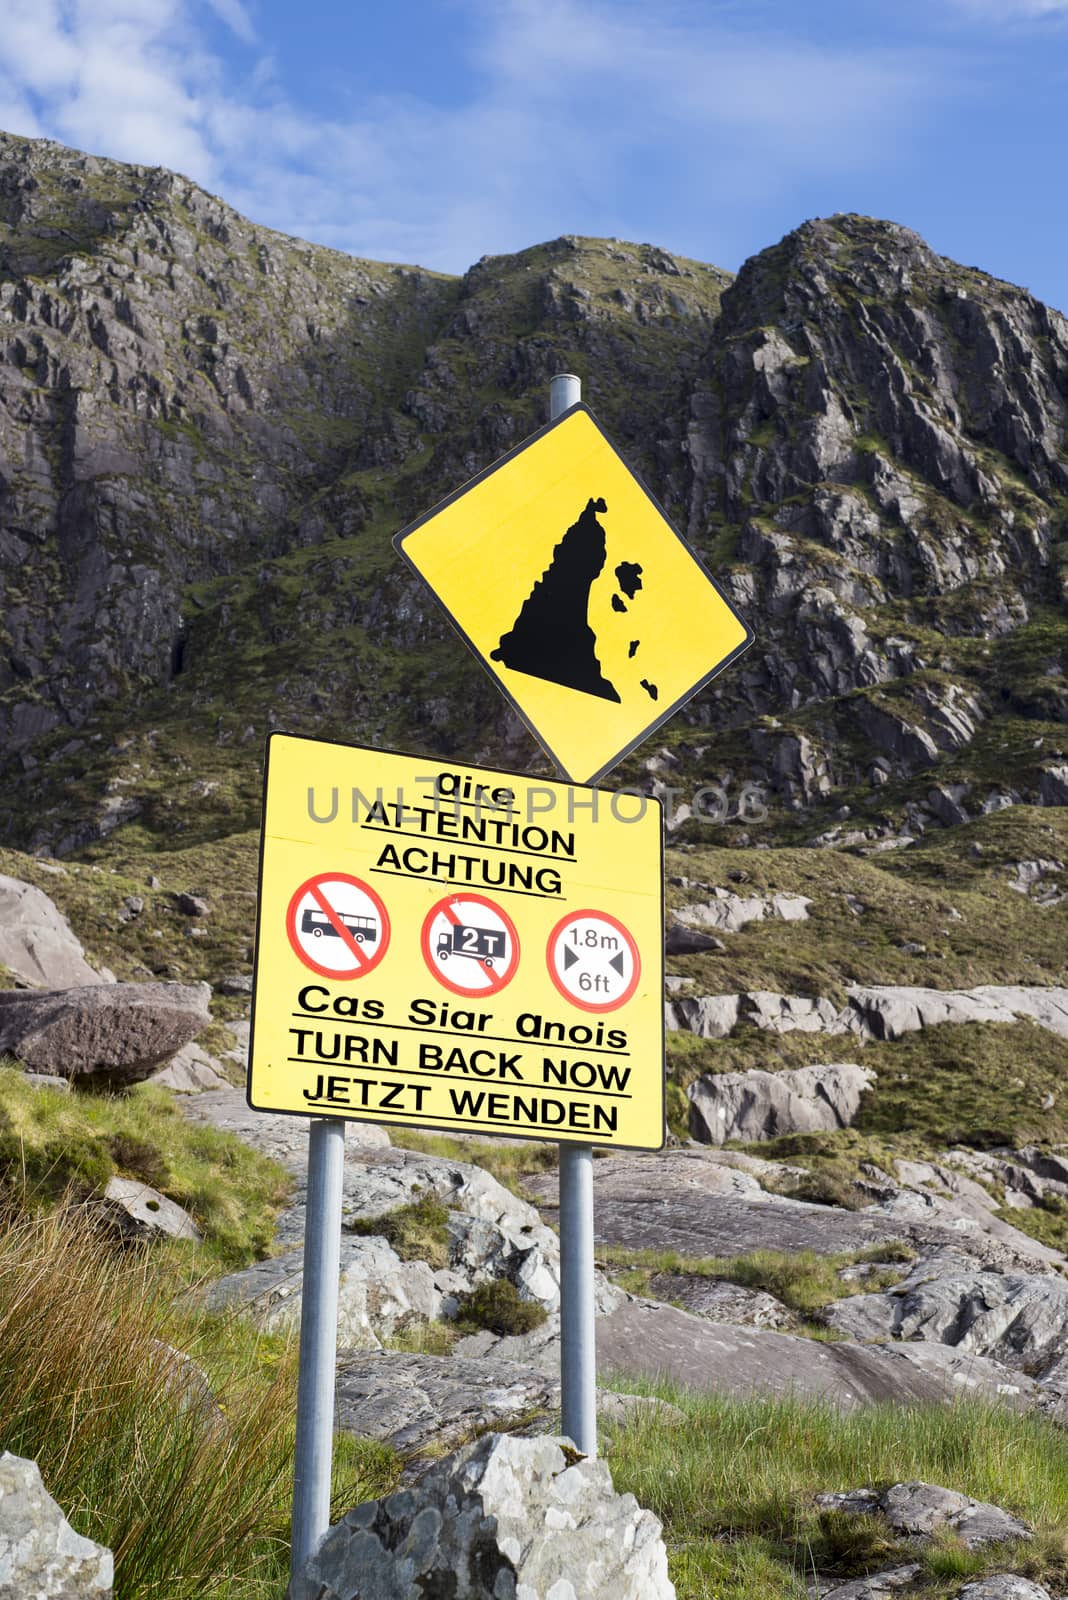 warning sign at the conor pass by morrbyte